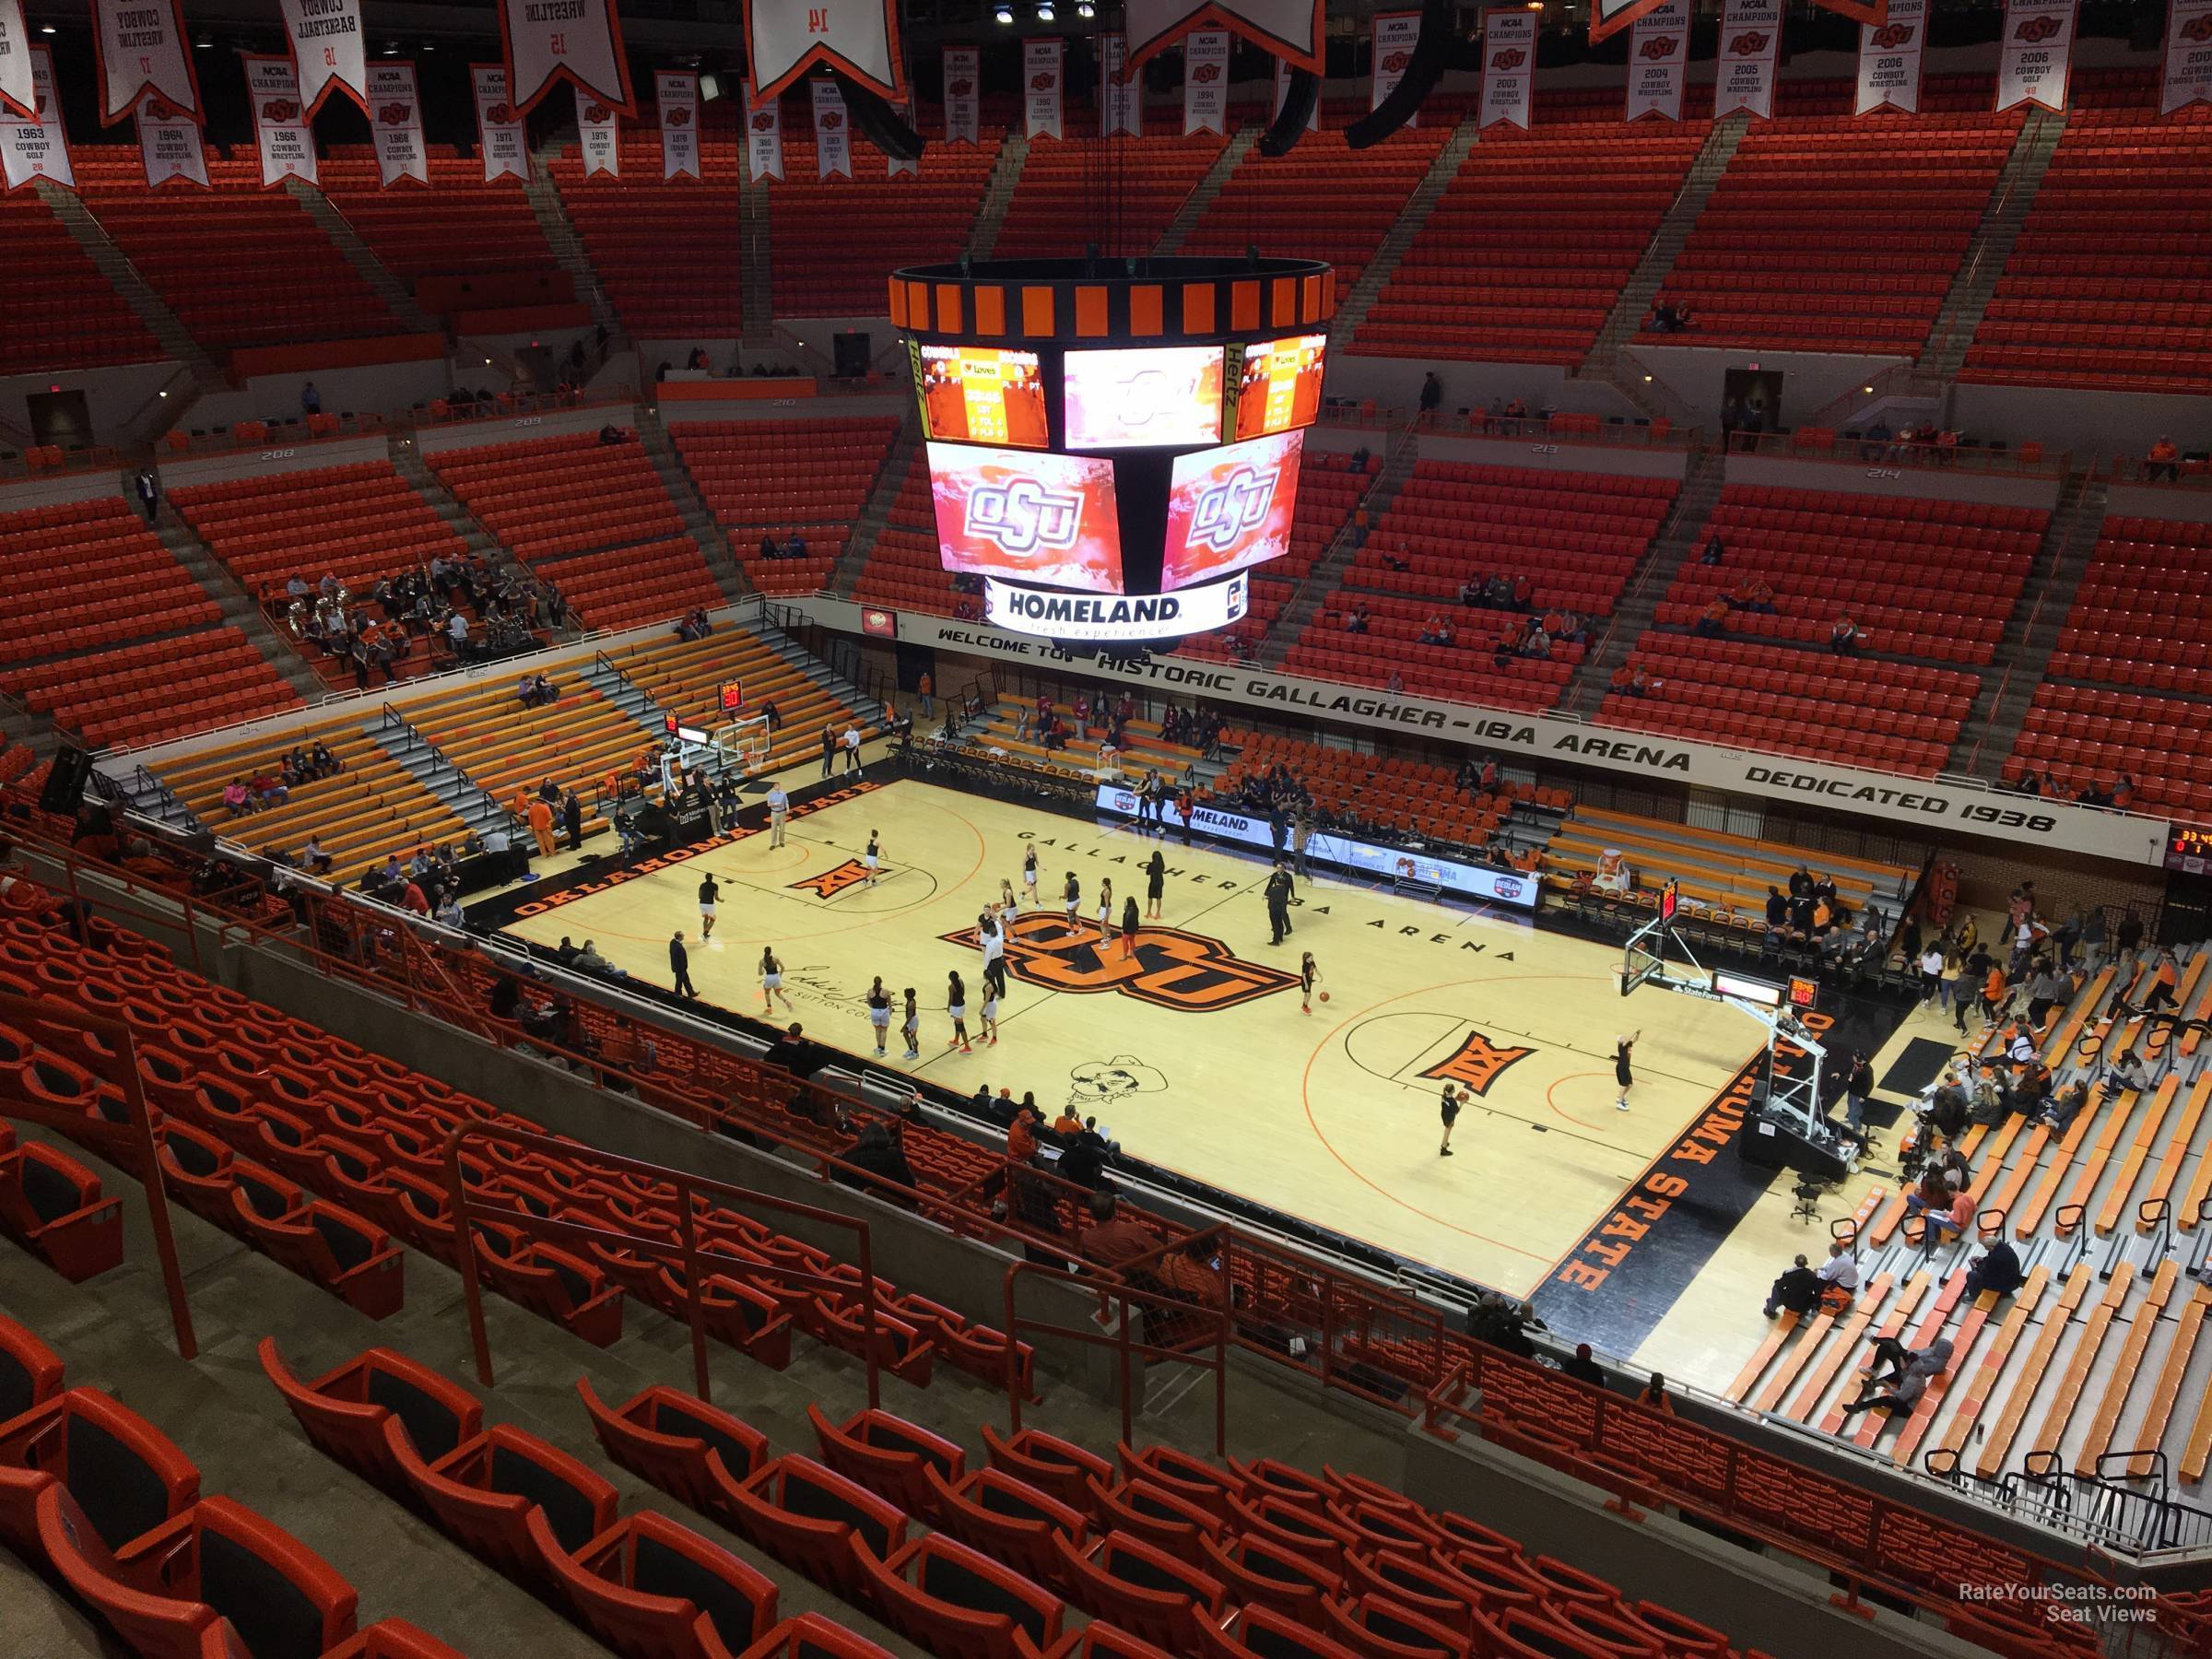 section 301, row 10 seat view  - gallagher-iba arena